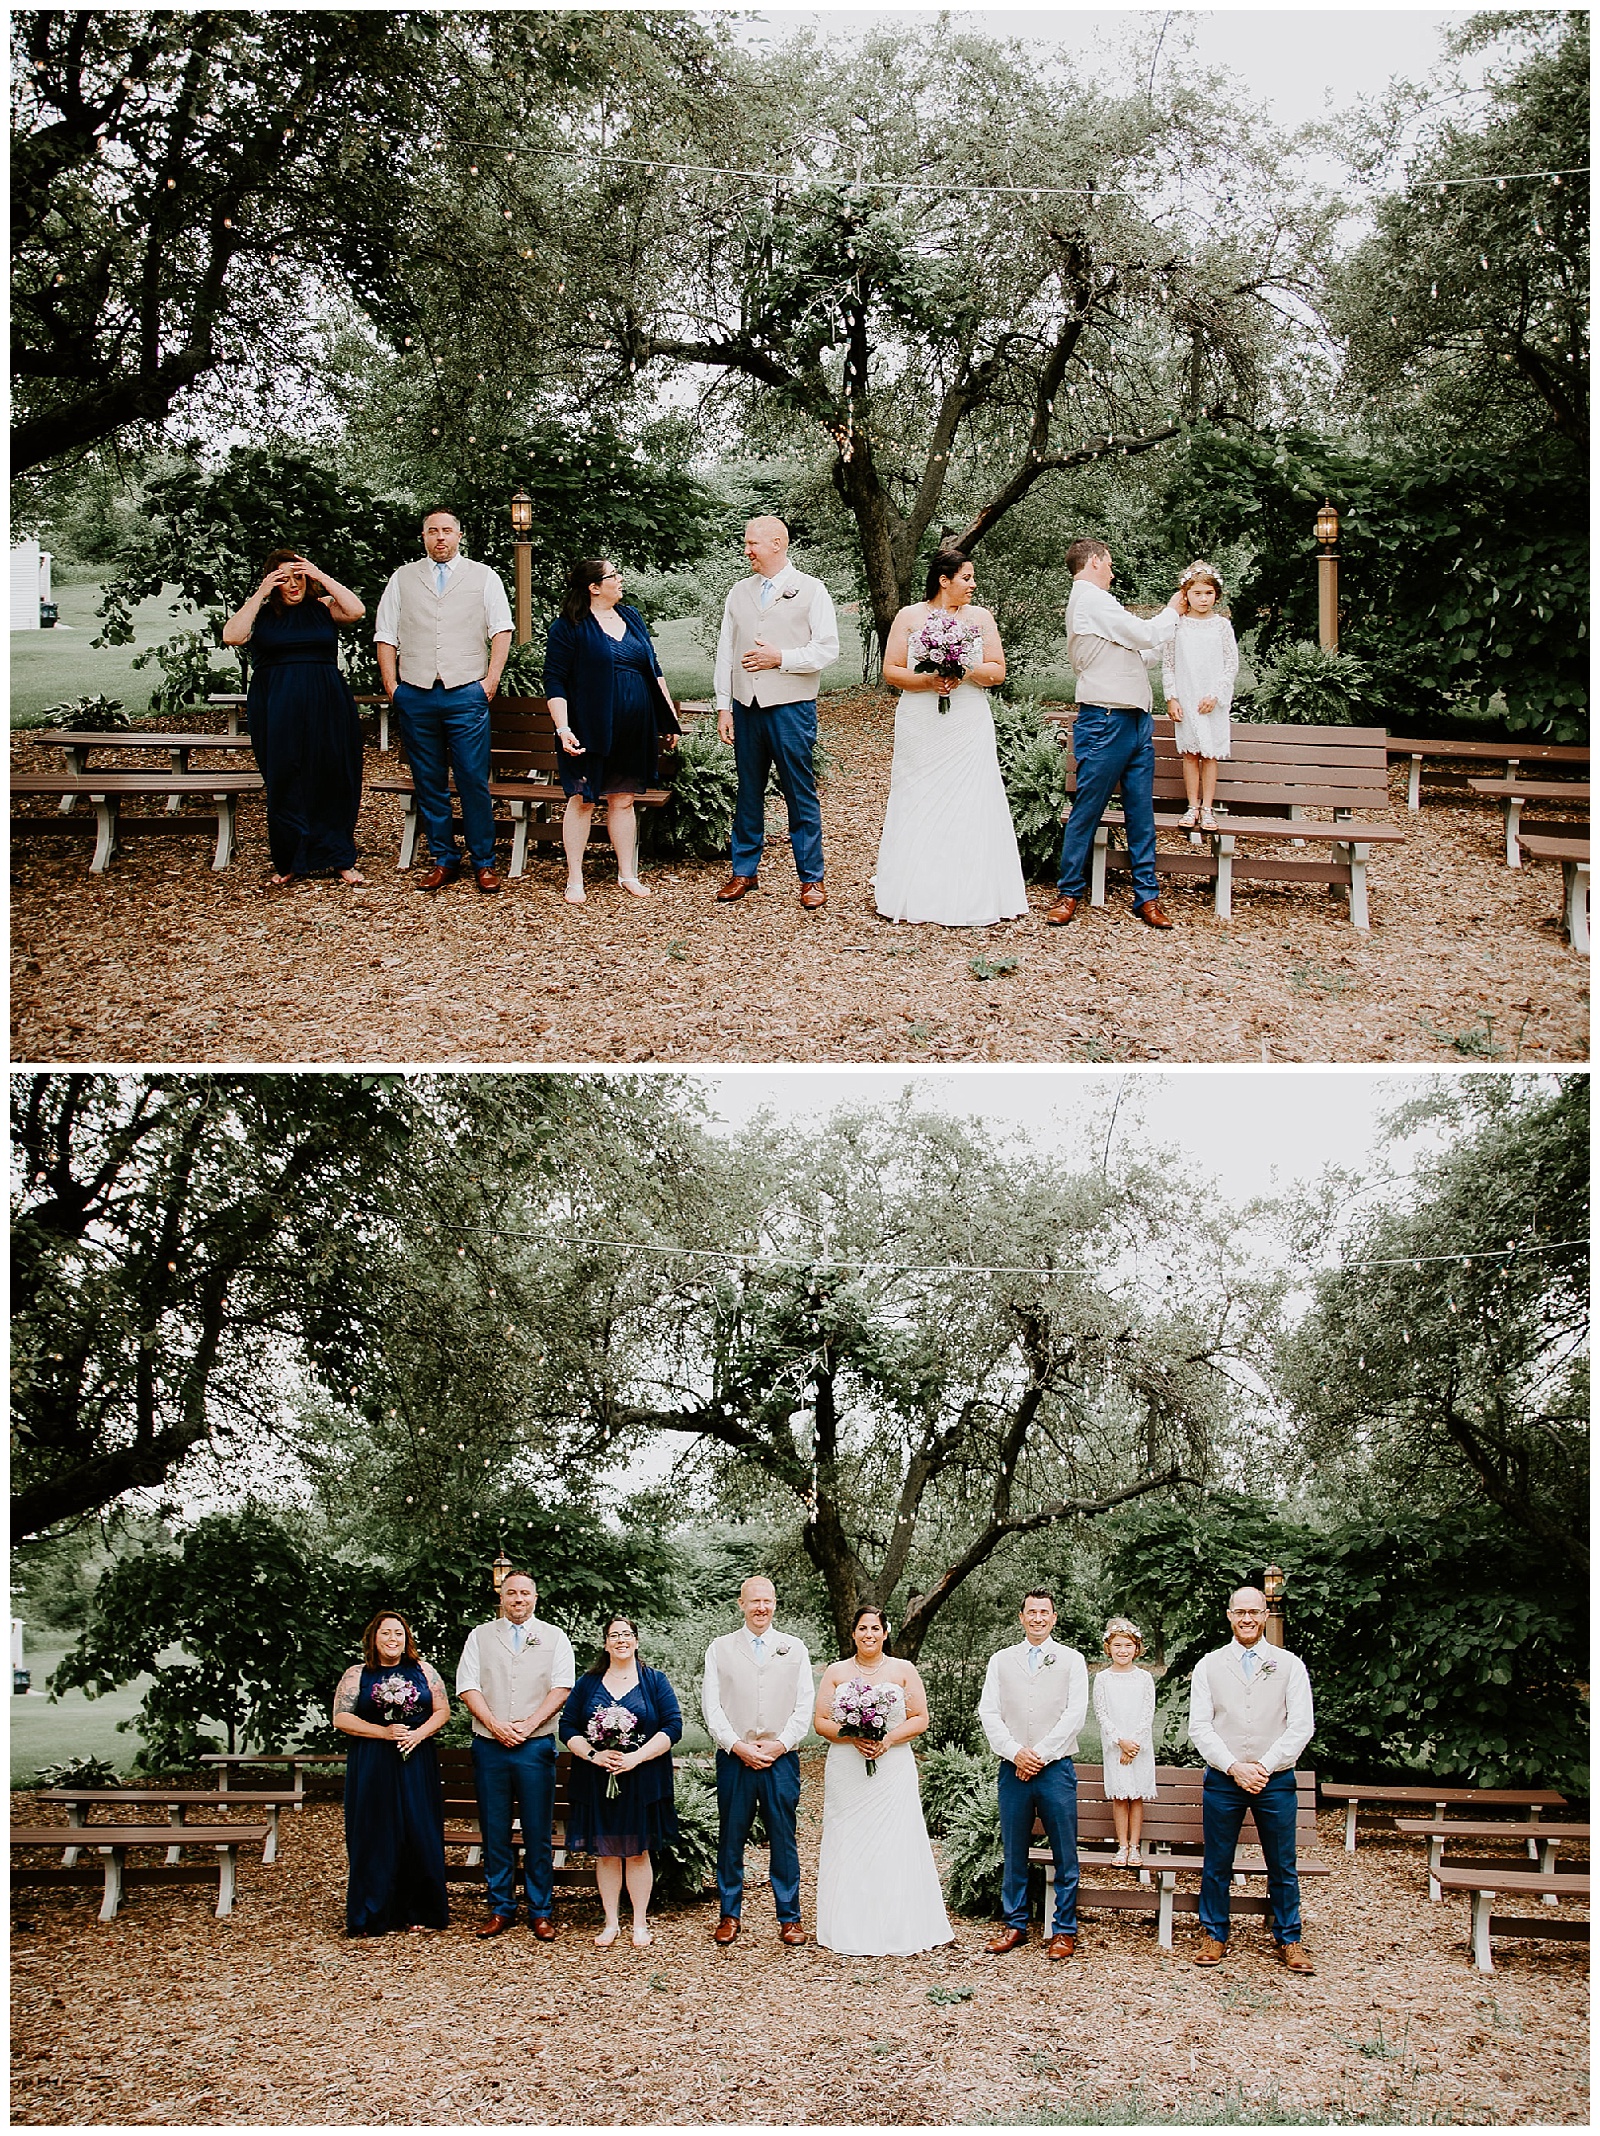 navy blue and tan wedding party photos in fennville michigan at apple blossom chapel and gardens